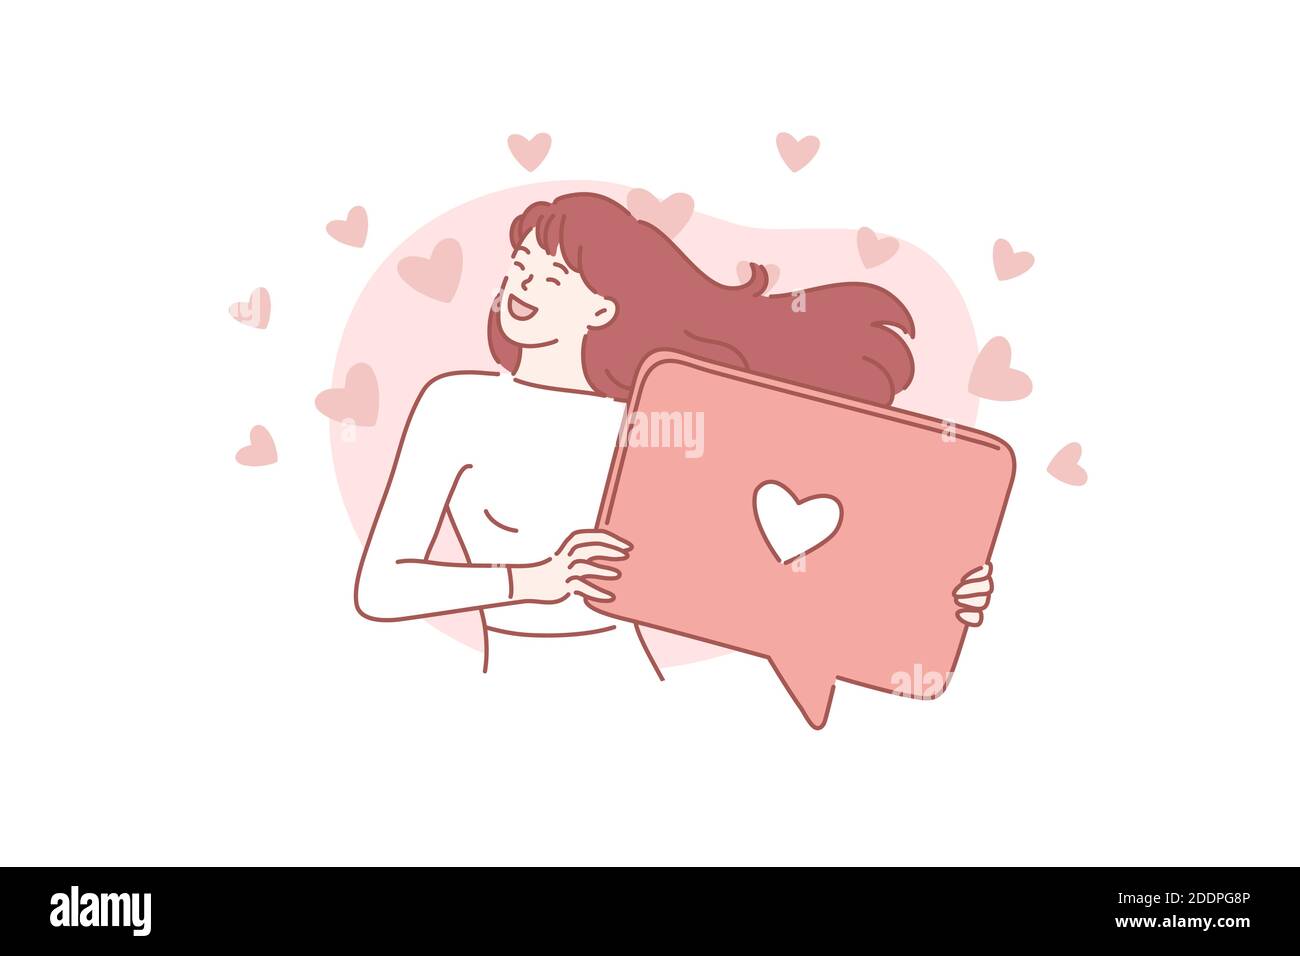 Social networking, promotion, smm concept. Young happy excited woman or girl holding a speech bubble. Sweet lady in a great mood puts a big like. Roma Stock Vector